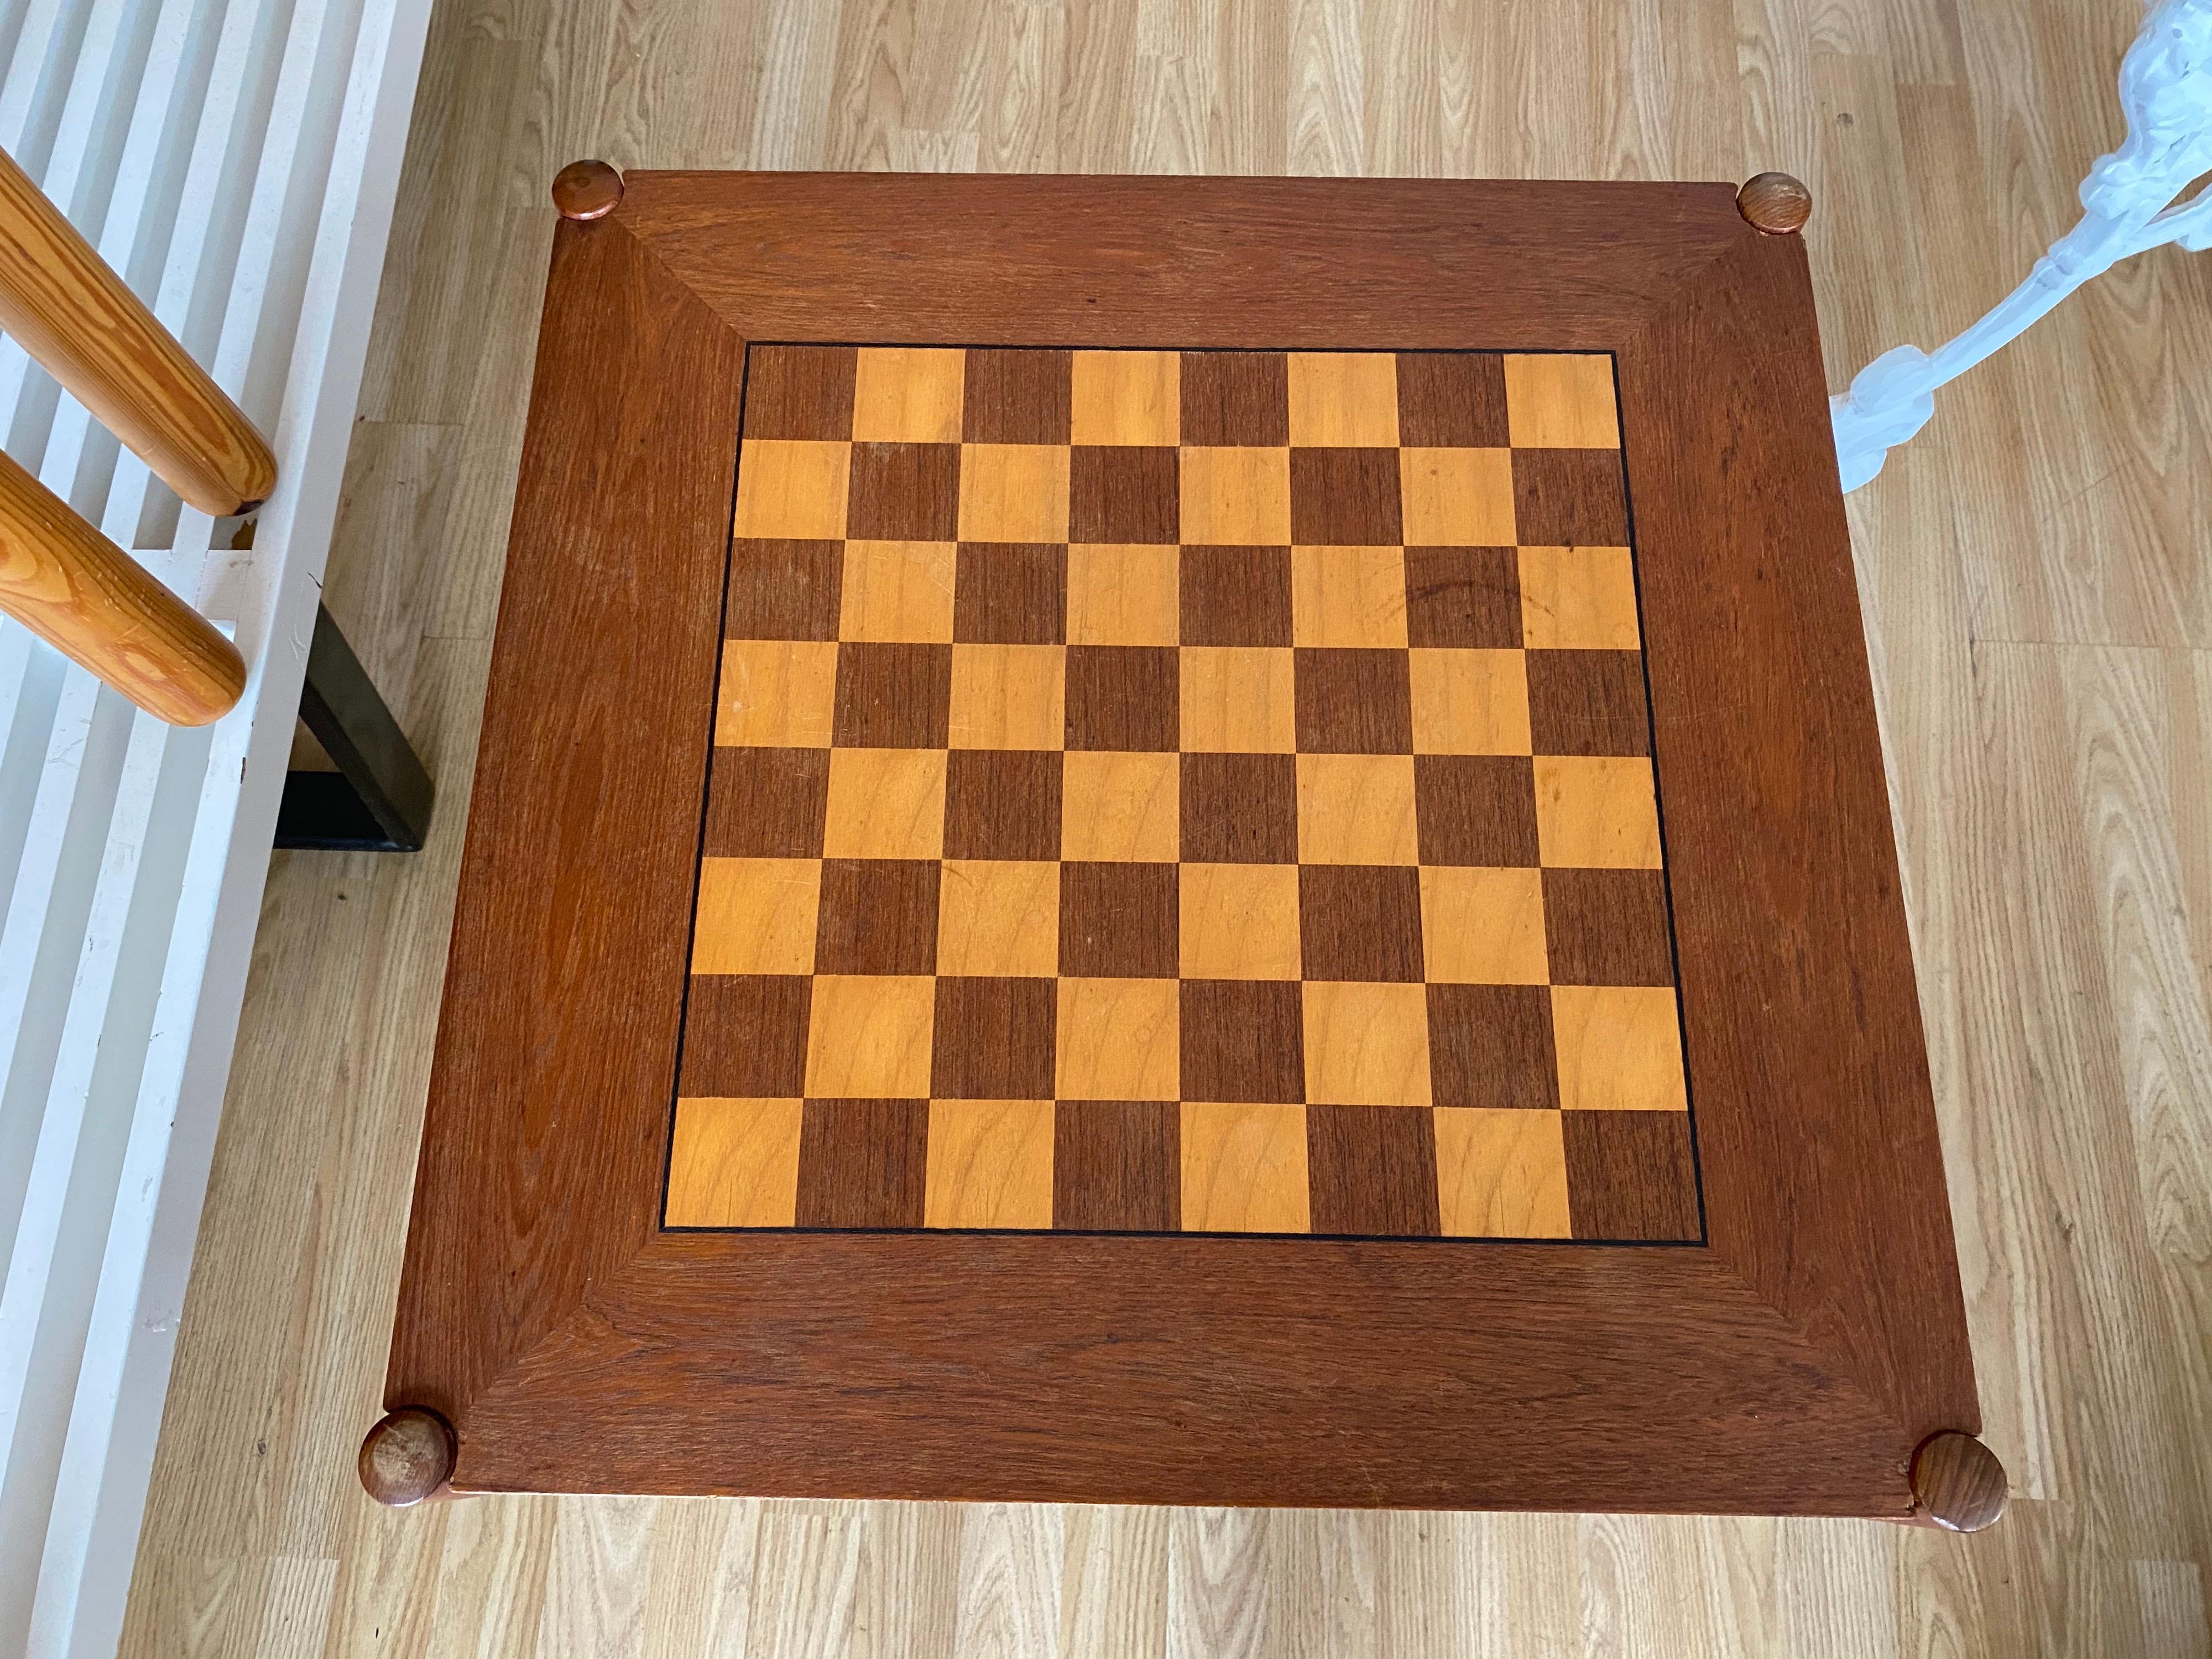 1960s vintage flip-top teak chess table made in Denmark designed by Georg Petersens. With a flip top, this table features a chessboard on one side and teak on the other. Vintage table is in good overall condition.